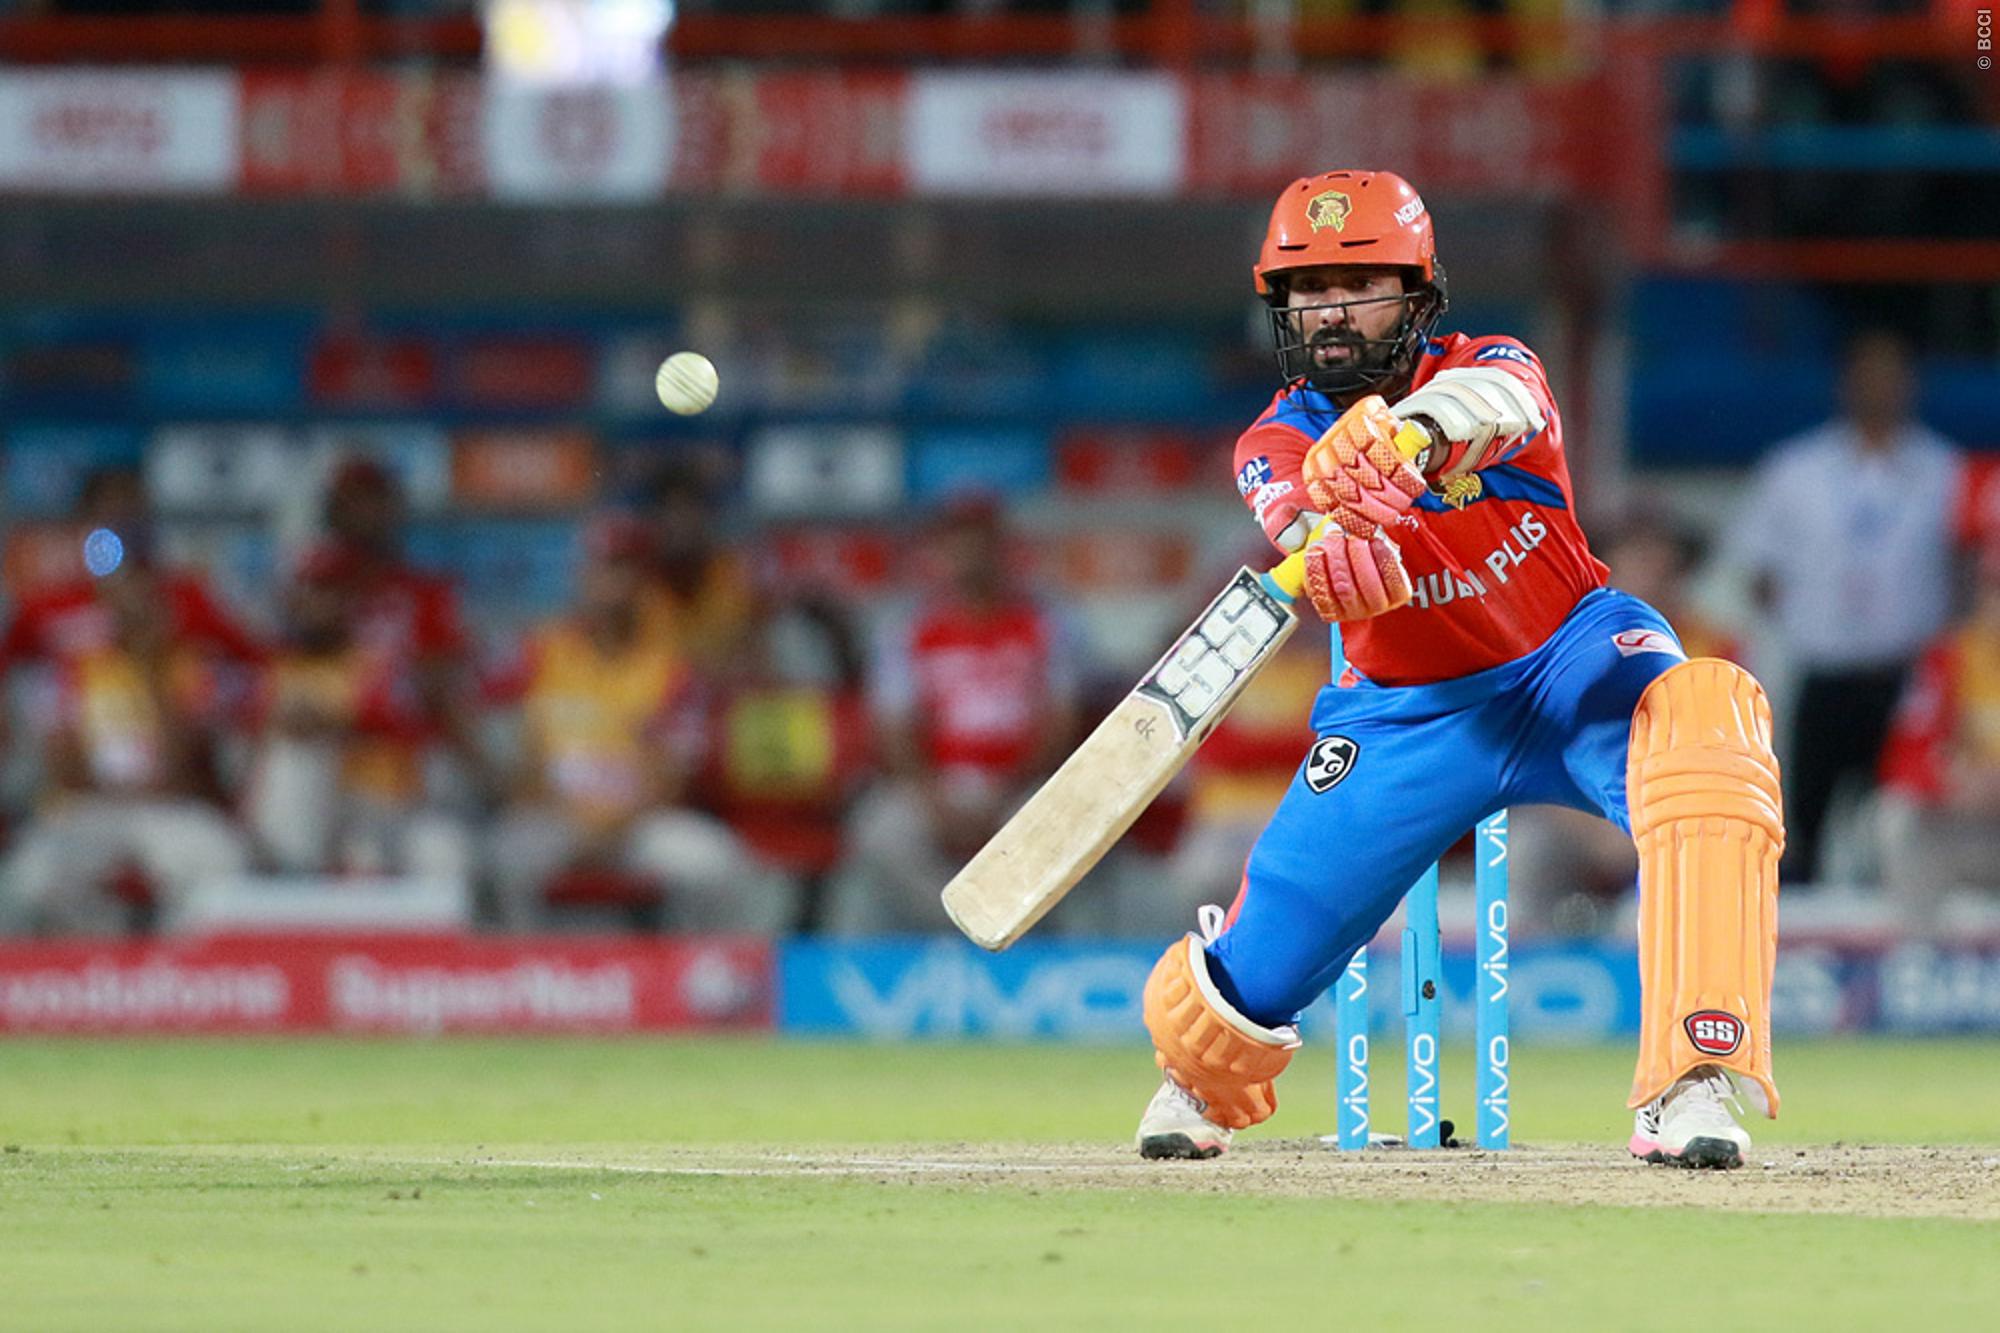 Twitter reacts to Dinesh Karthik's "slow innings" and Dwayne Smith's "exceptional over"